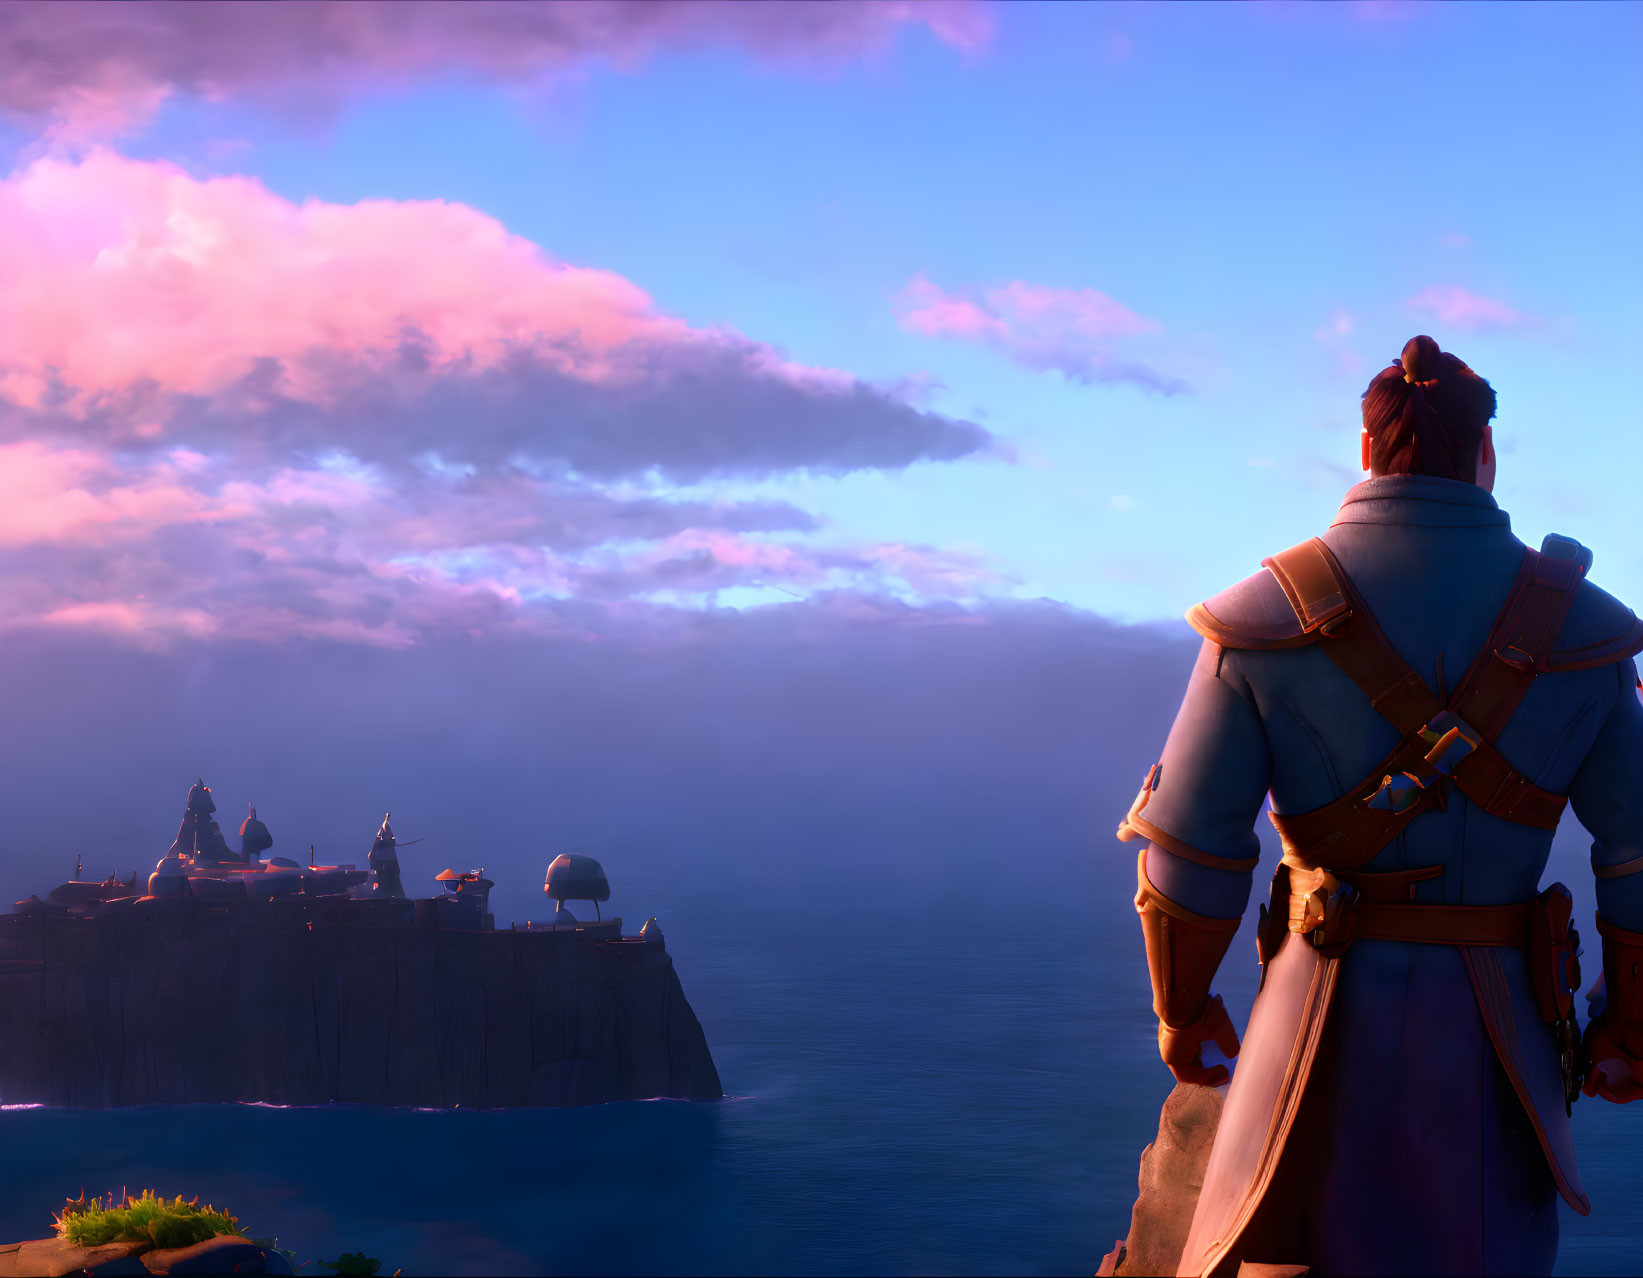 Character in Blue Outfit Observing Castle on Clifftop at Sunset